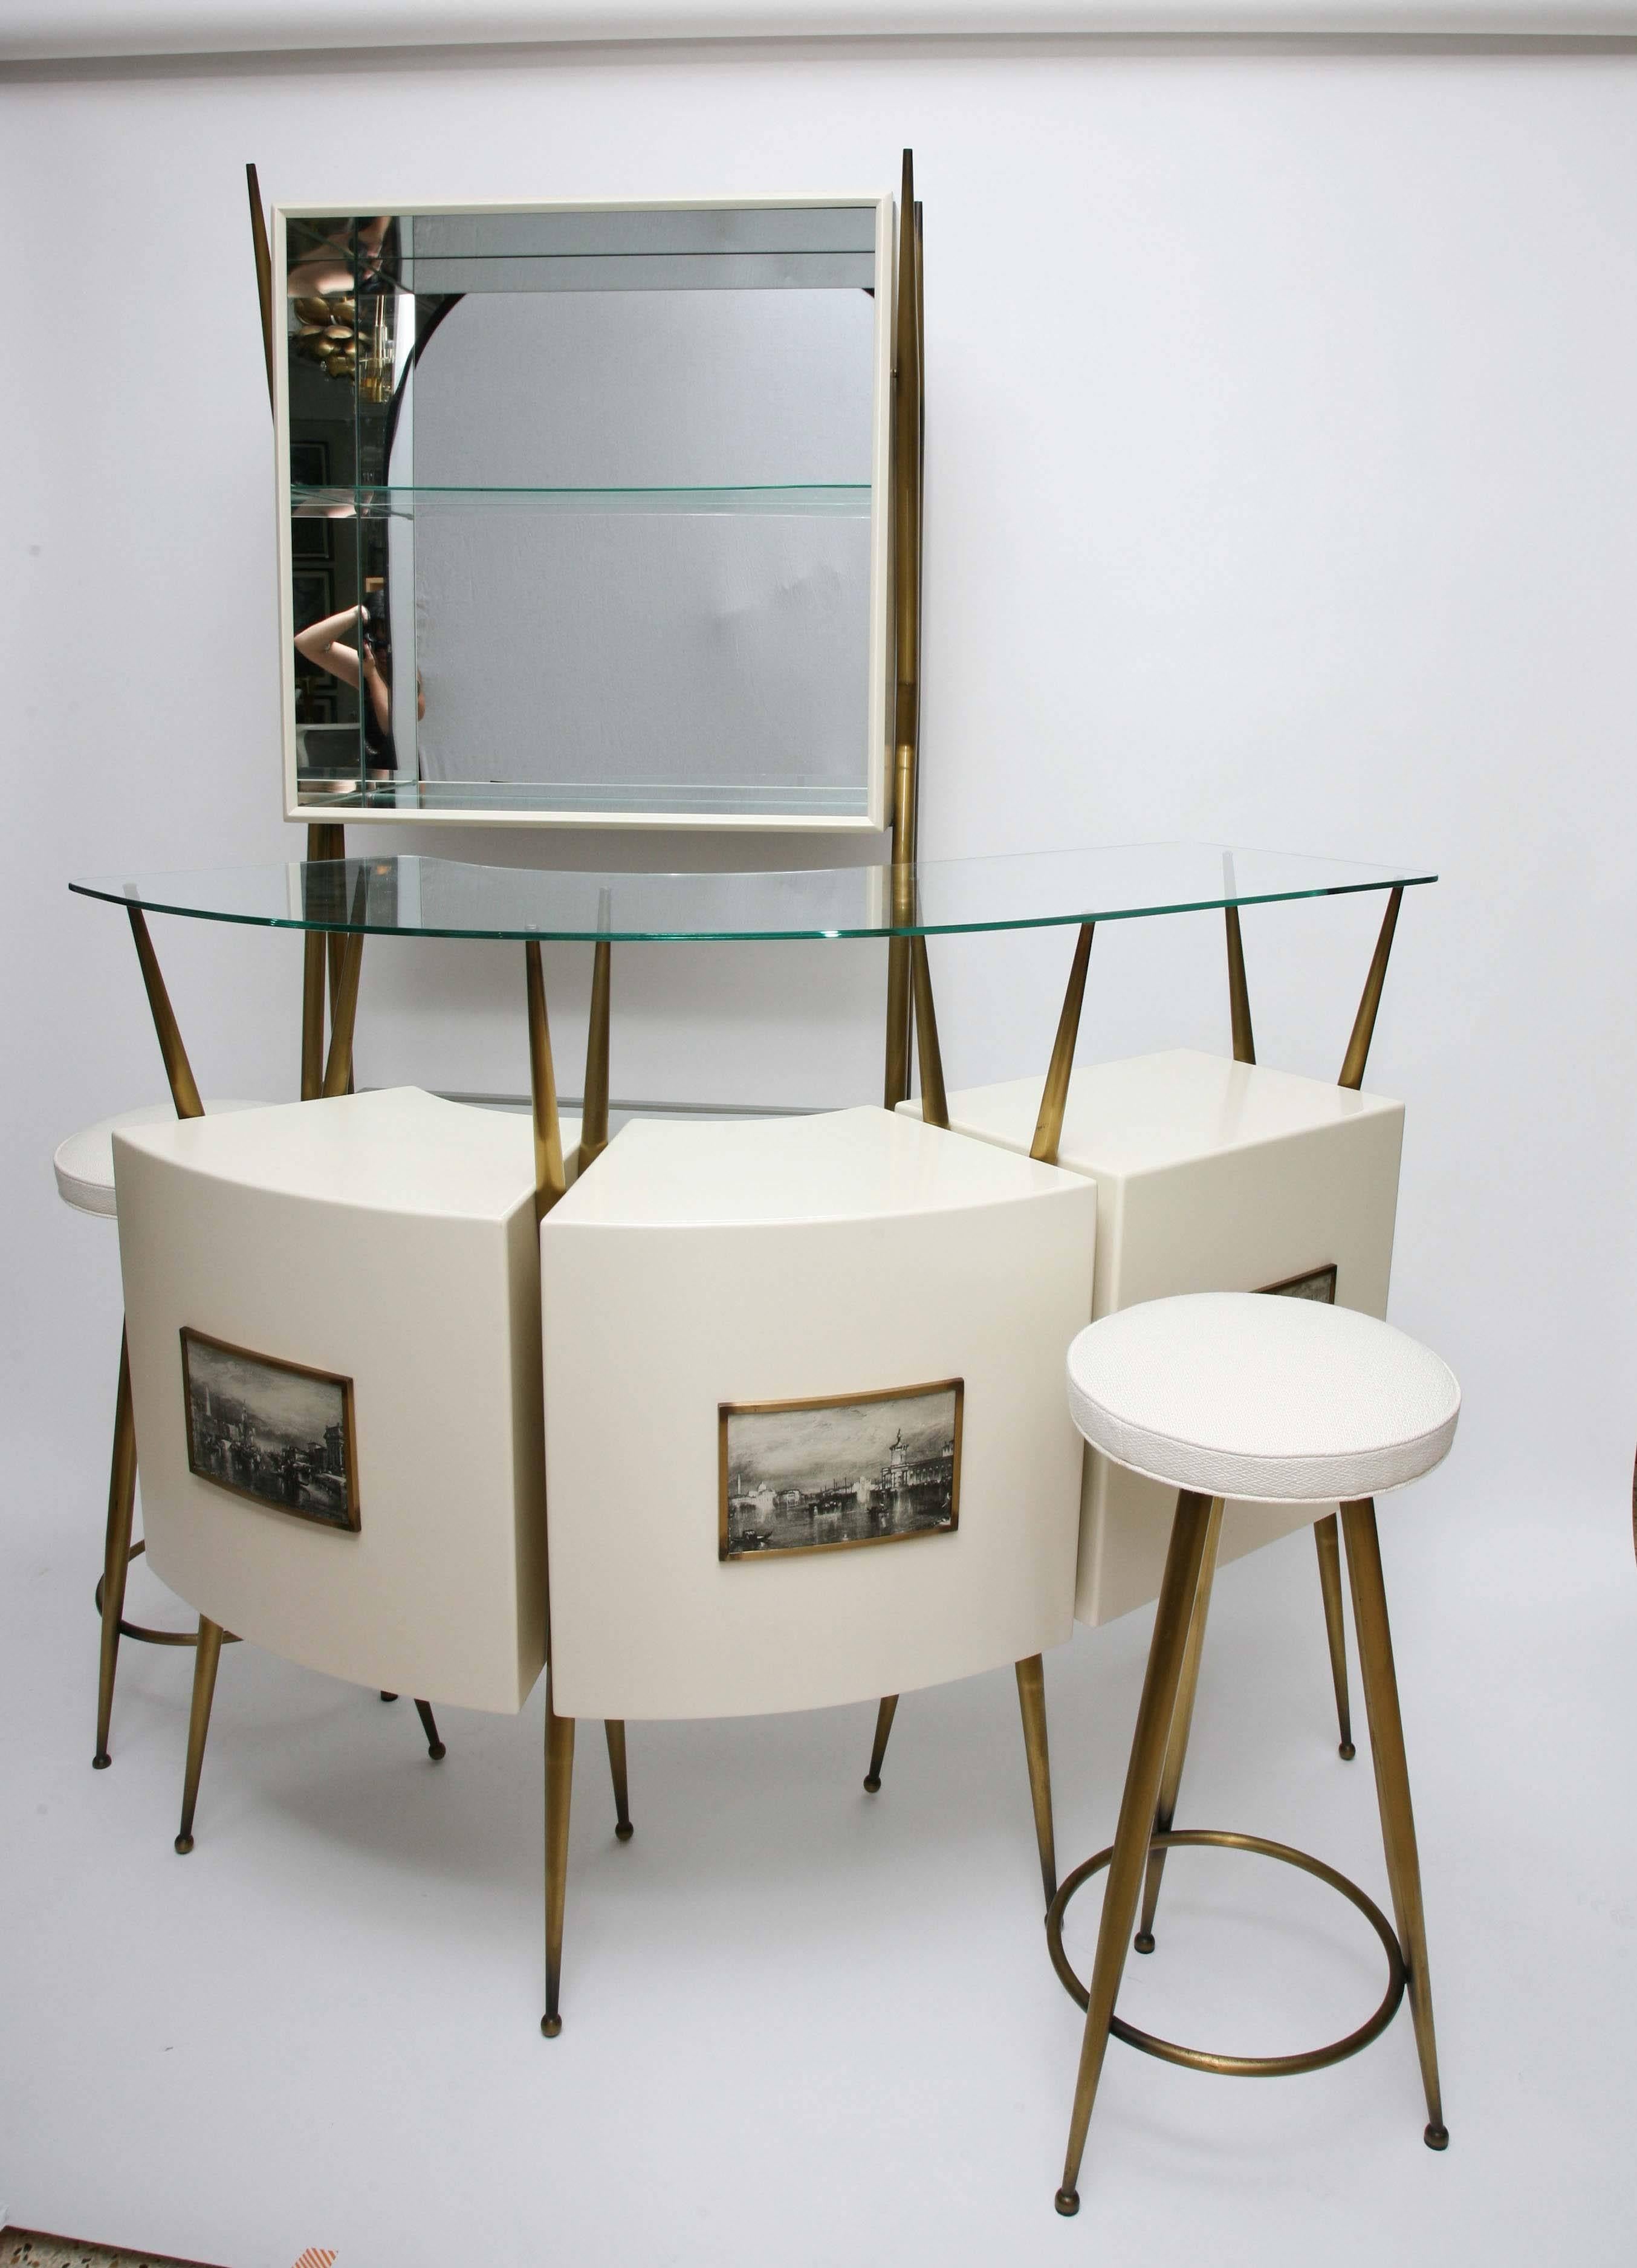 Que bella! 1950s Italian bar suite in the manner of Gio Ponti. The suite includes a glass-topped bar, a mirror-backed standing wall unit, and two matching bar stools, all with patinated brass legs and hardware. Venetian harbor scenes, styled after